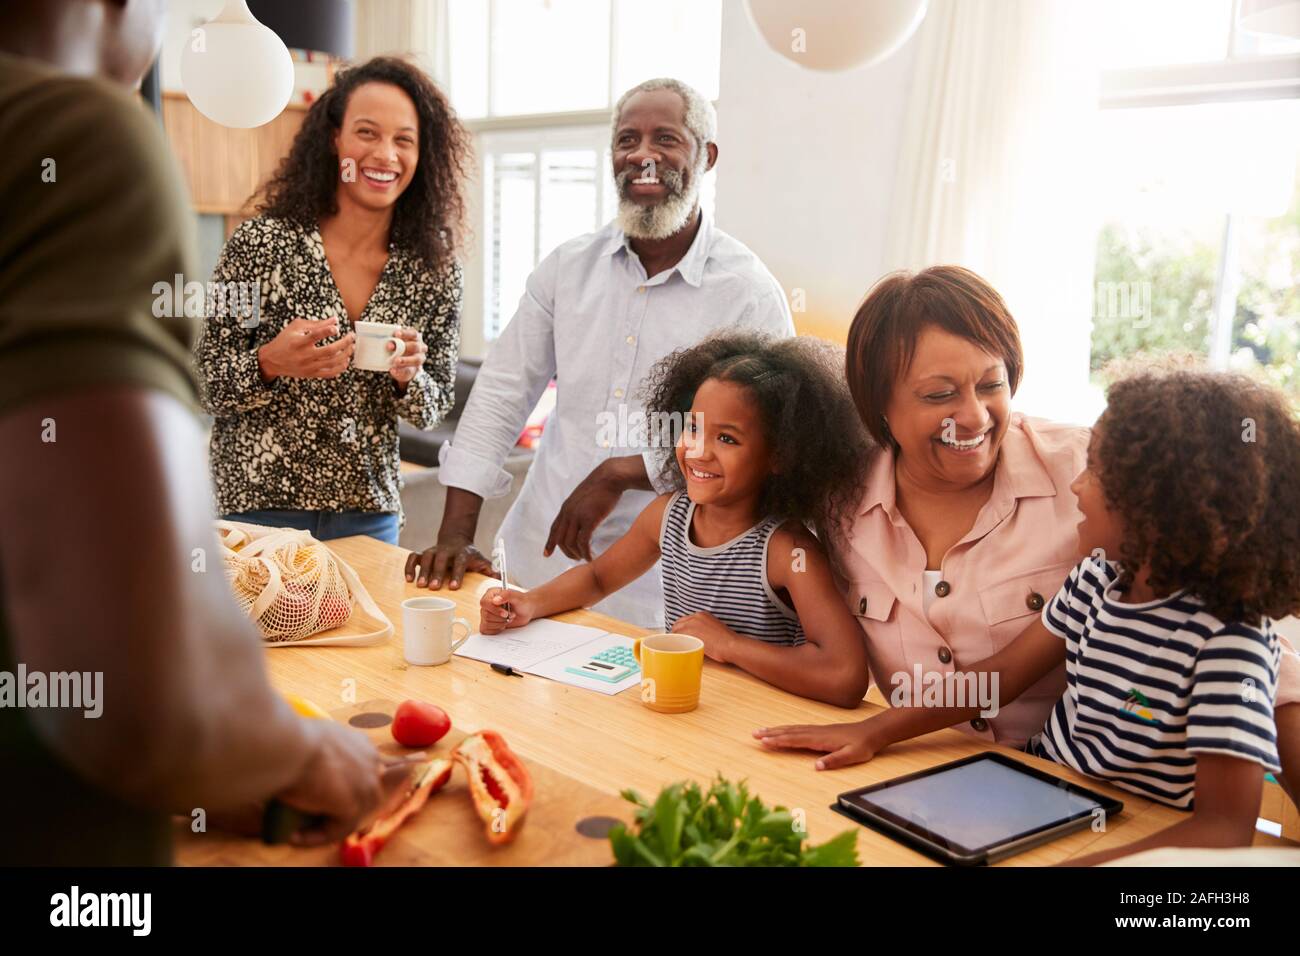 Grandparents Sitting At Table With Grandchildren Playing Games As Family Prepares Meal Stock Photo